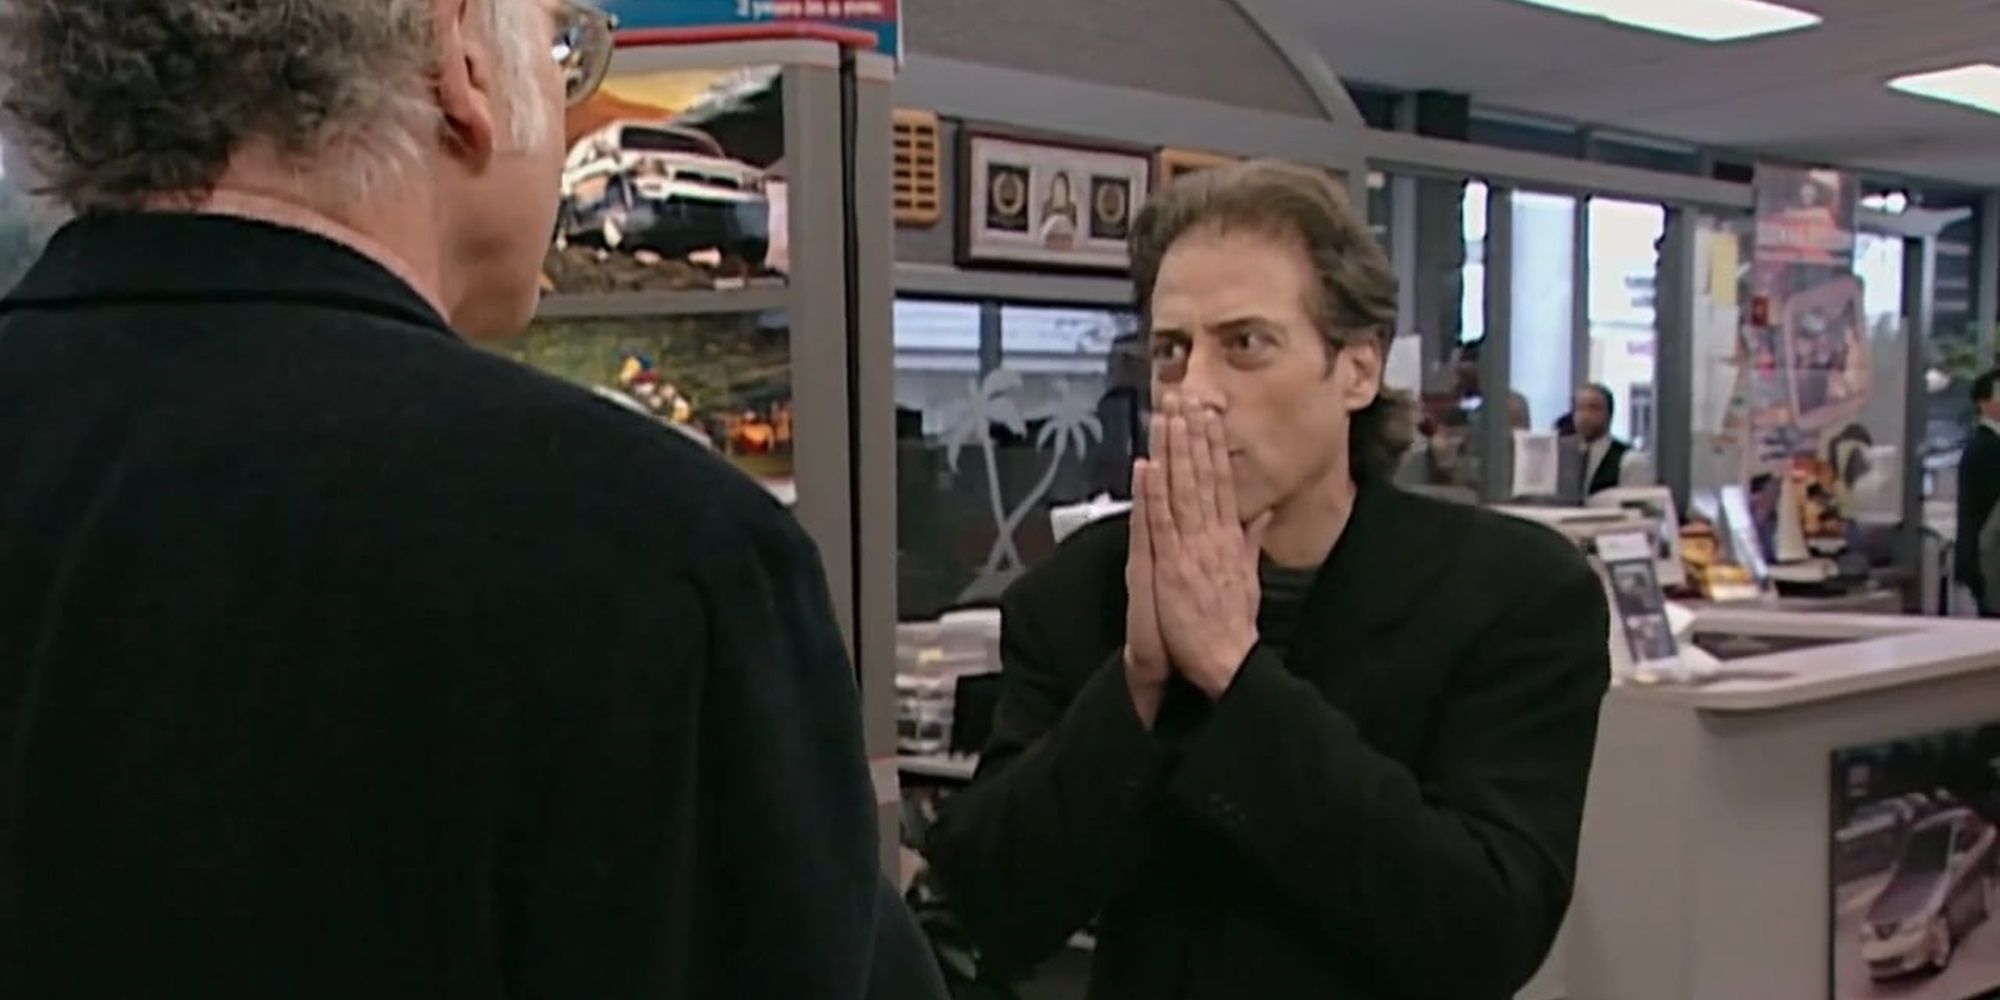 Richard confronts Larry at a car dealership in Curb Your Enthusiasm